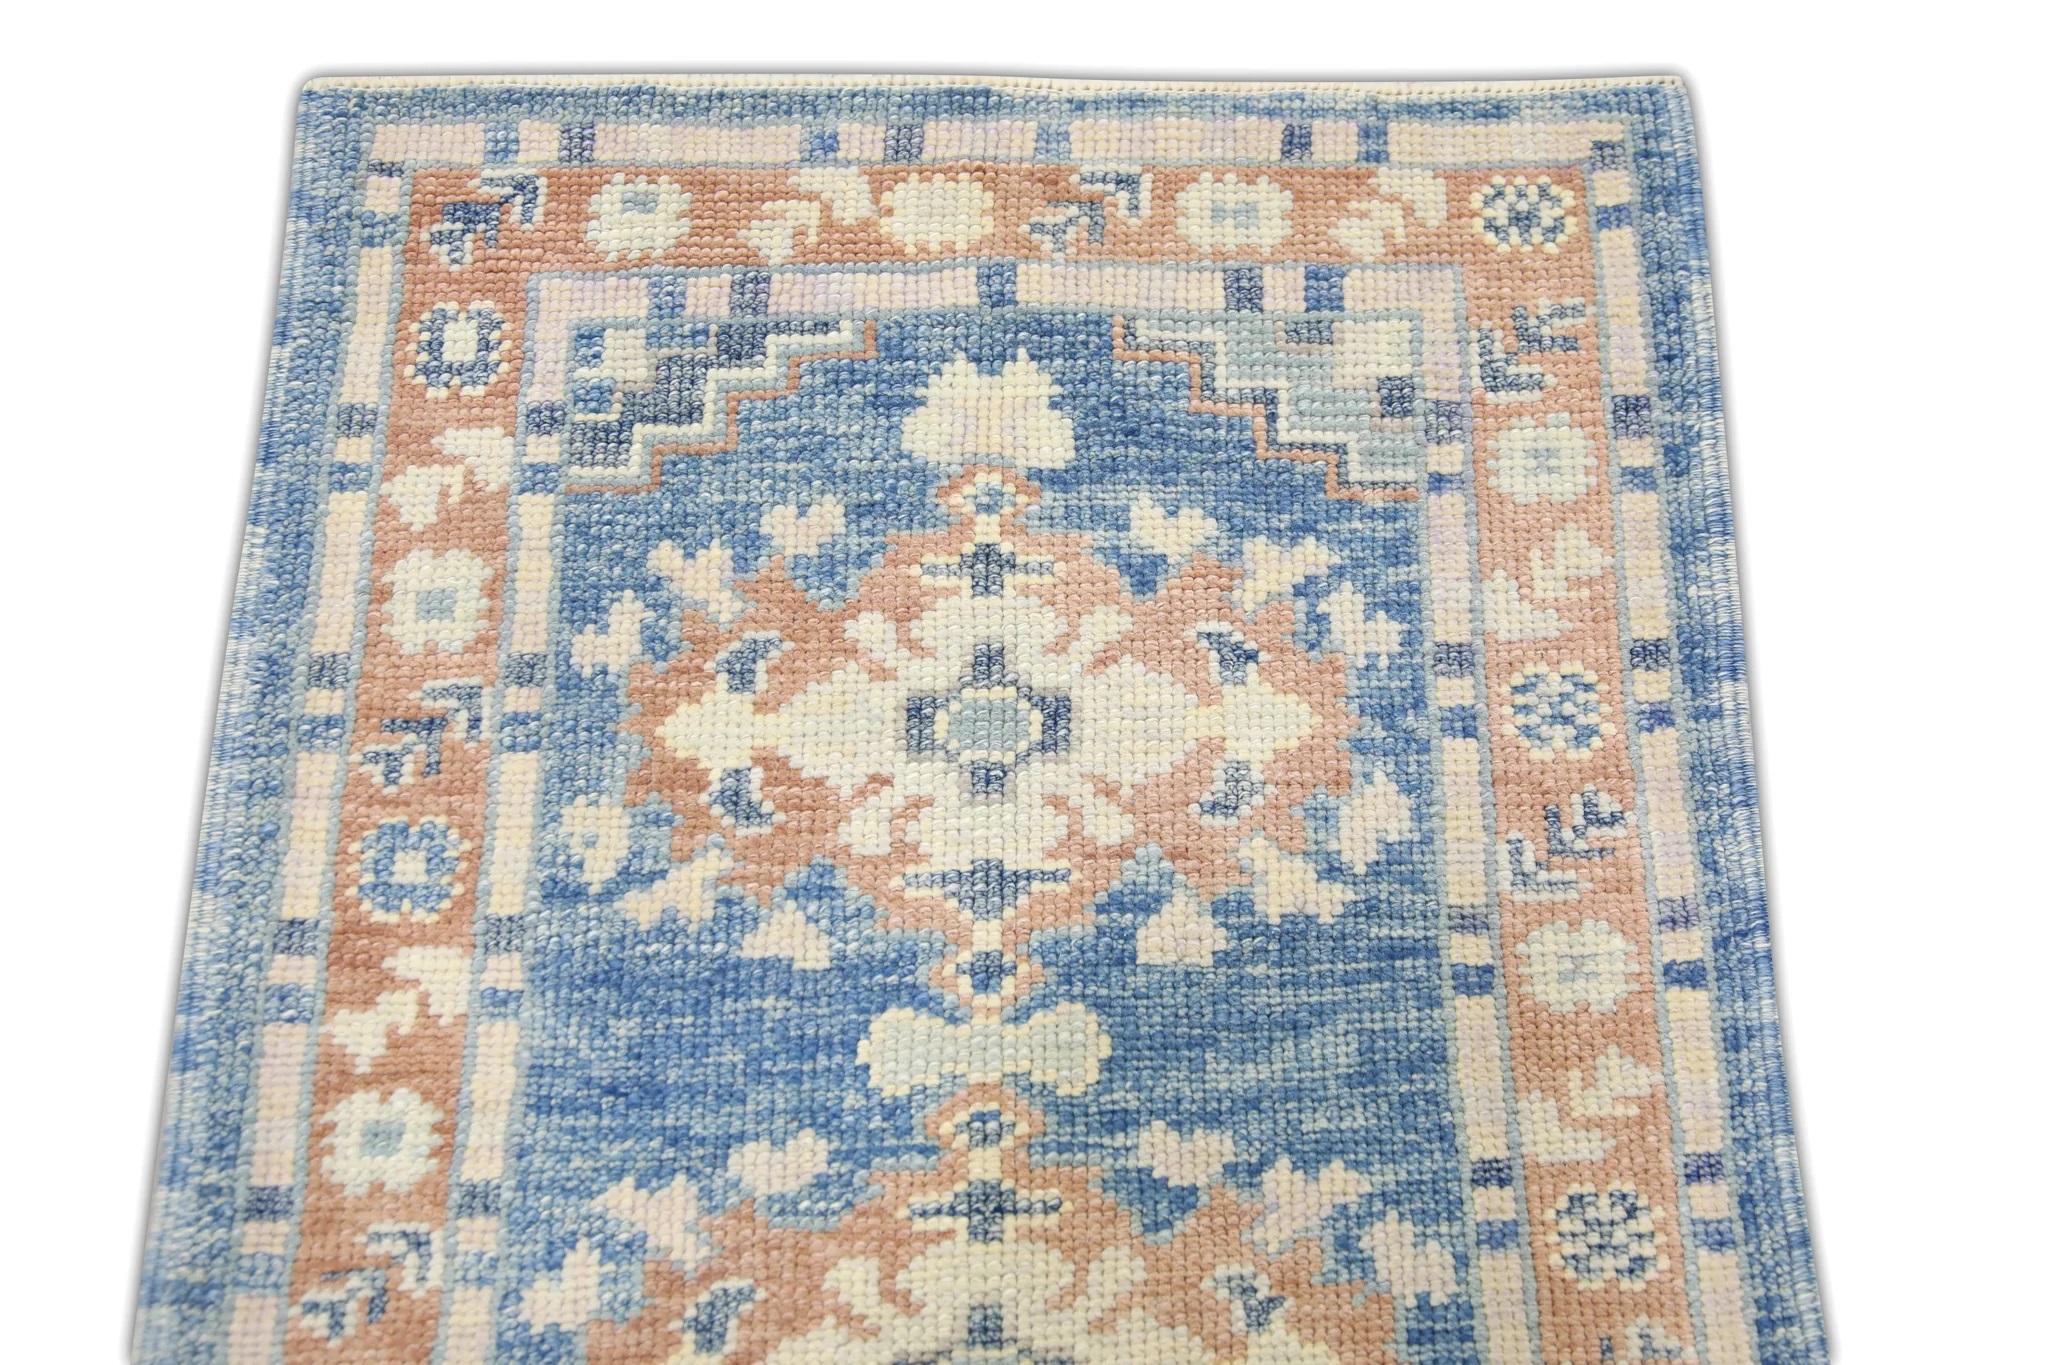 Vegetable Dyed Blue and Salmon Floral Design Handwoven Wool Turkish Oushak Rug 2'4